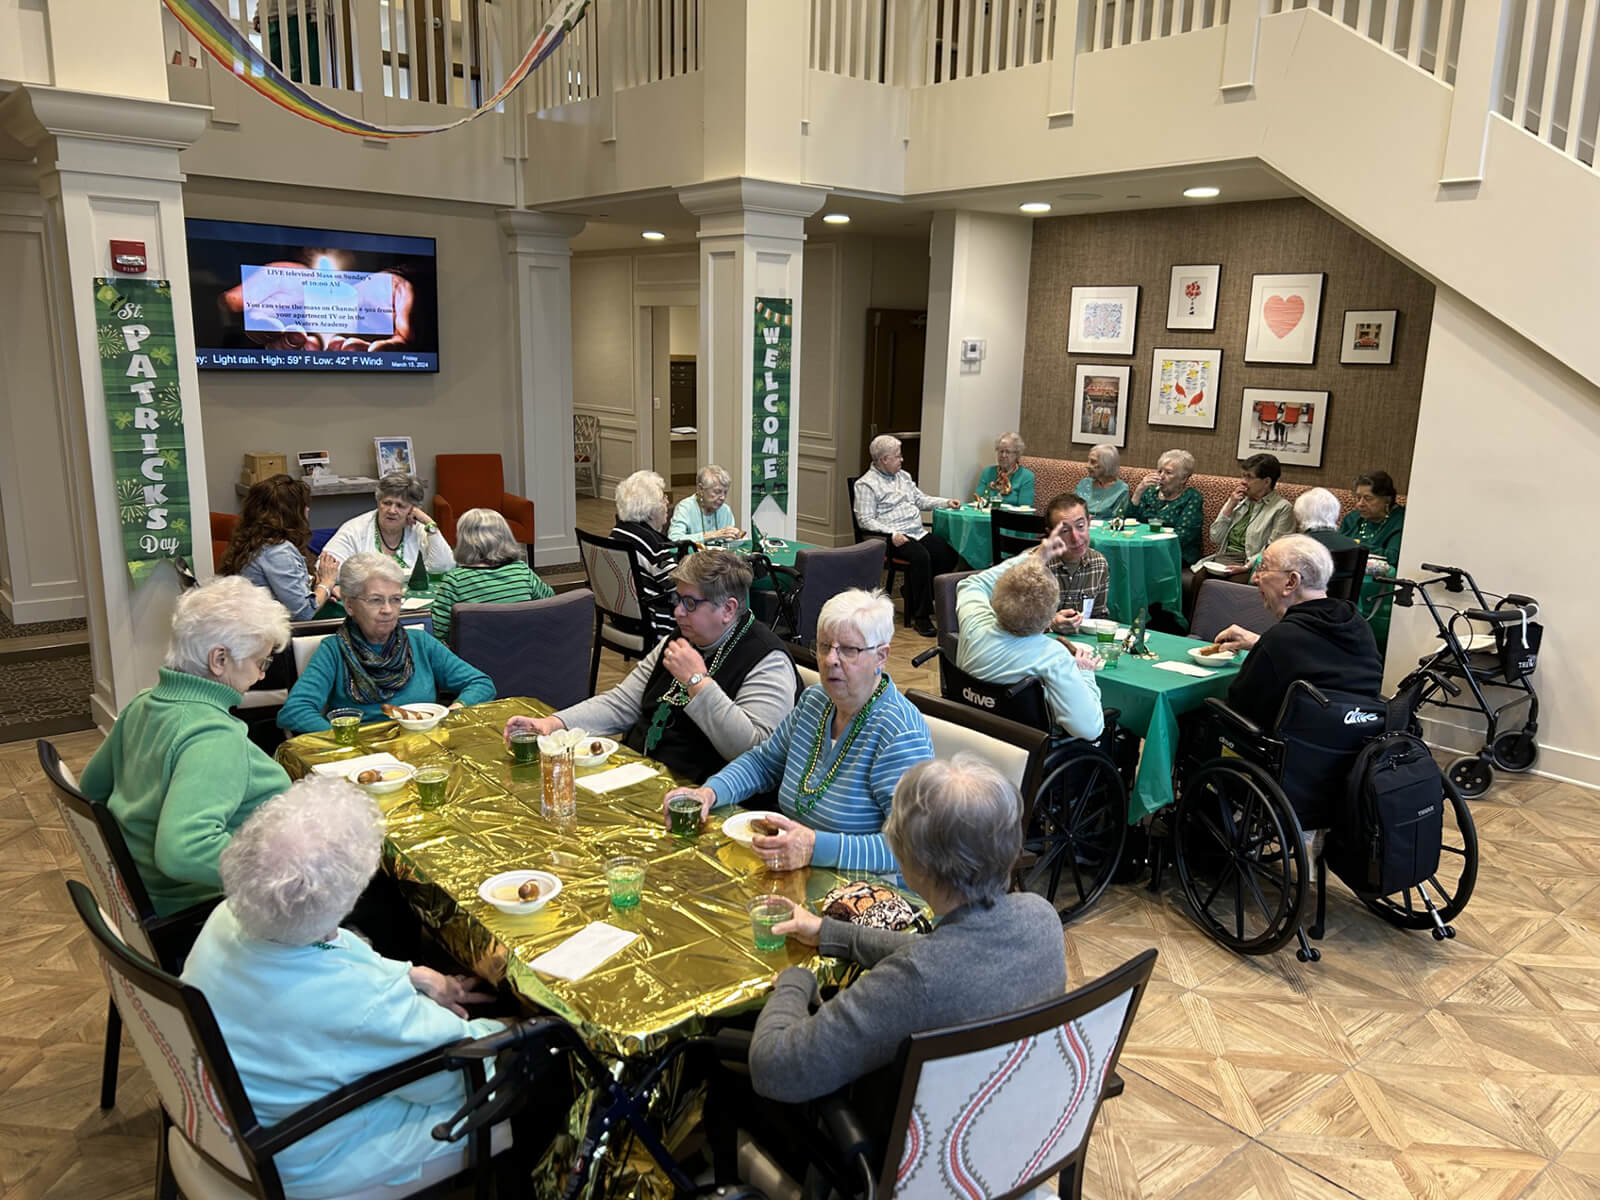 Seniors at The Waters of Wexford celebrating St. Patrick’s Day with a festive meal, highlighting cultural festivities.